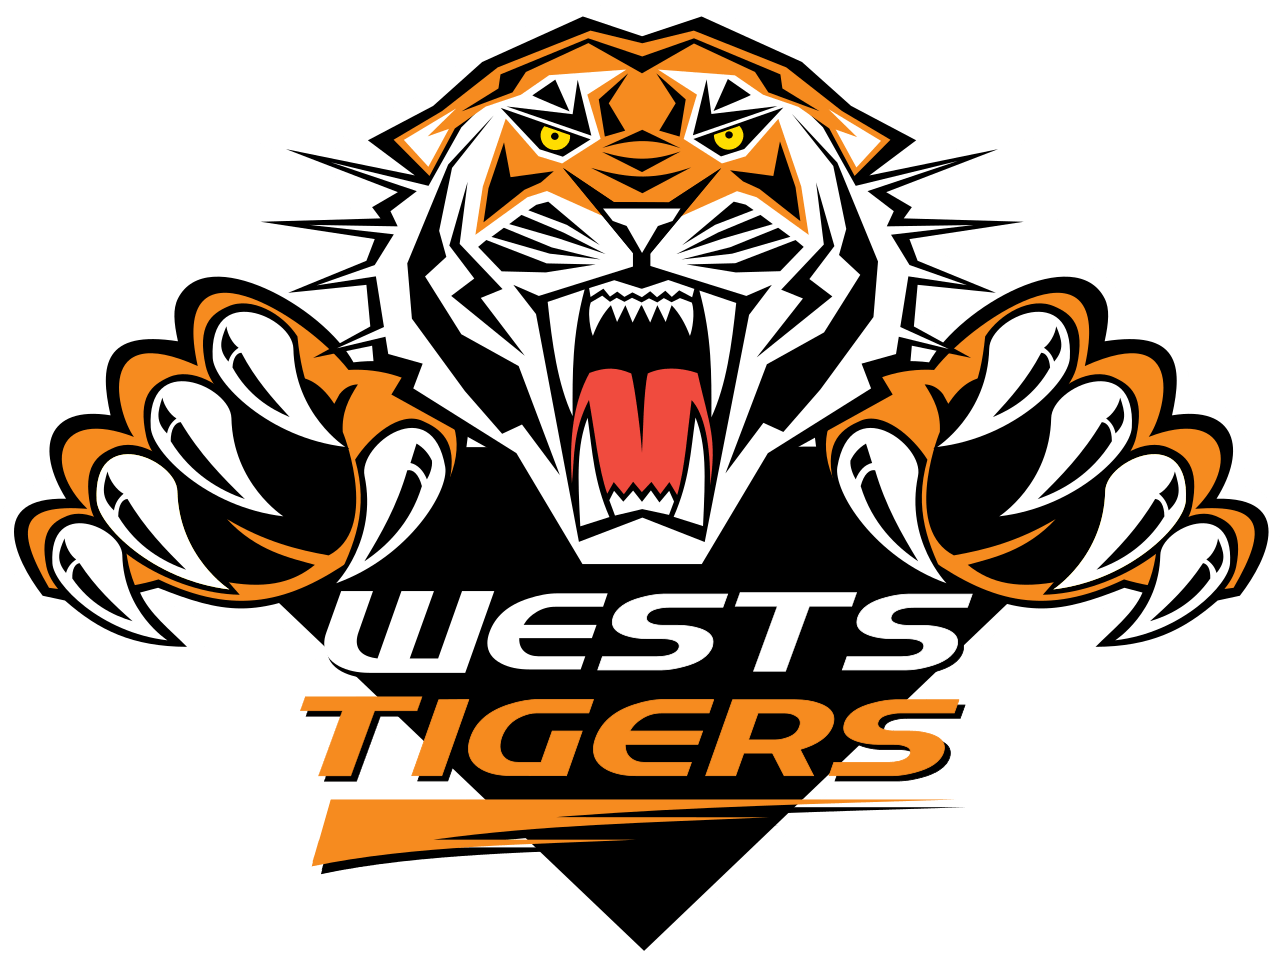 Tigers Logo - 1280px Wests Tigers Logo.svg.png